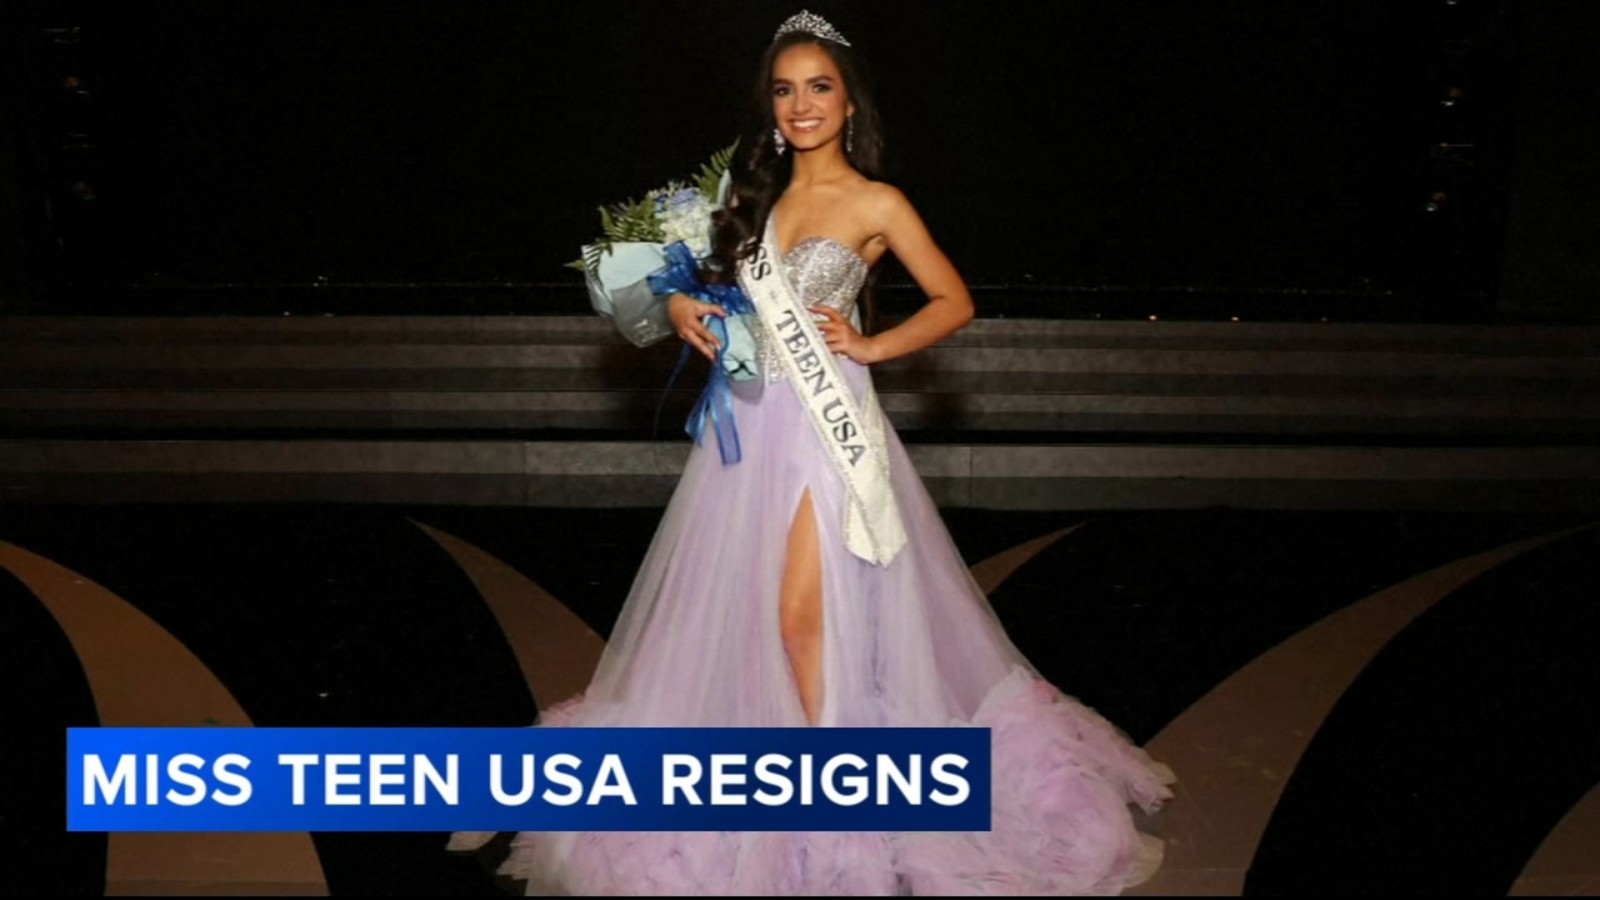 Miss Teen USA steps down just days after Miss USA's resignation, citing 'personal values'